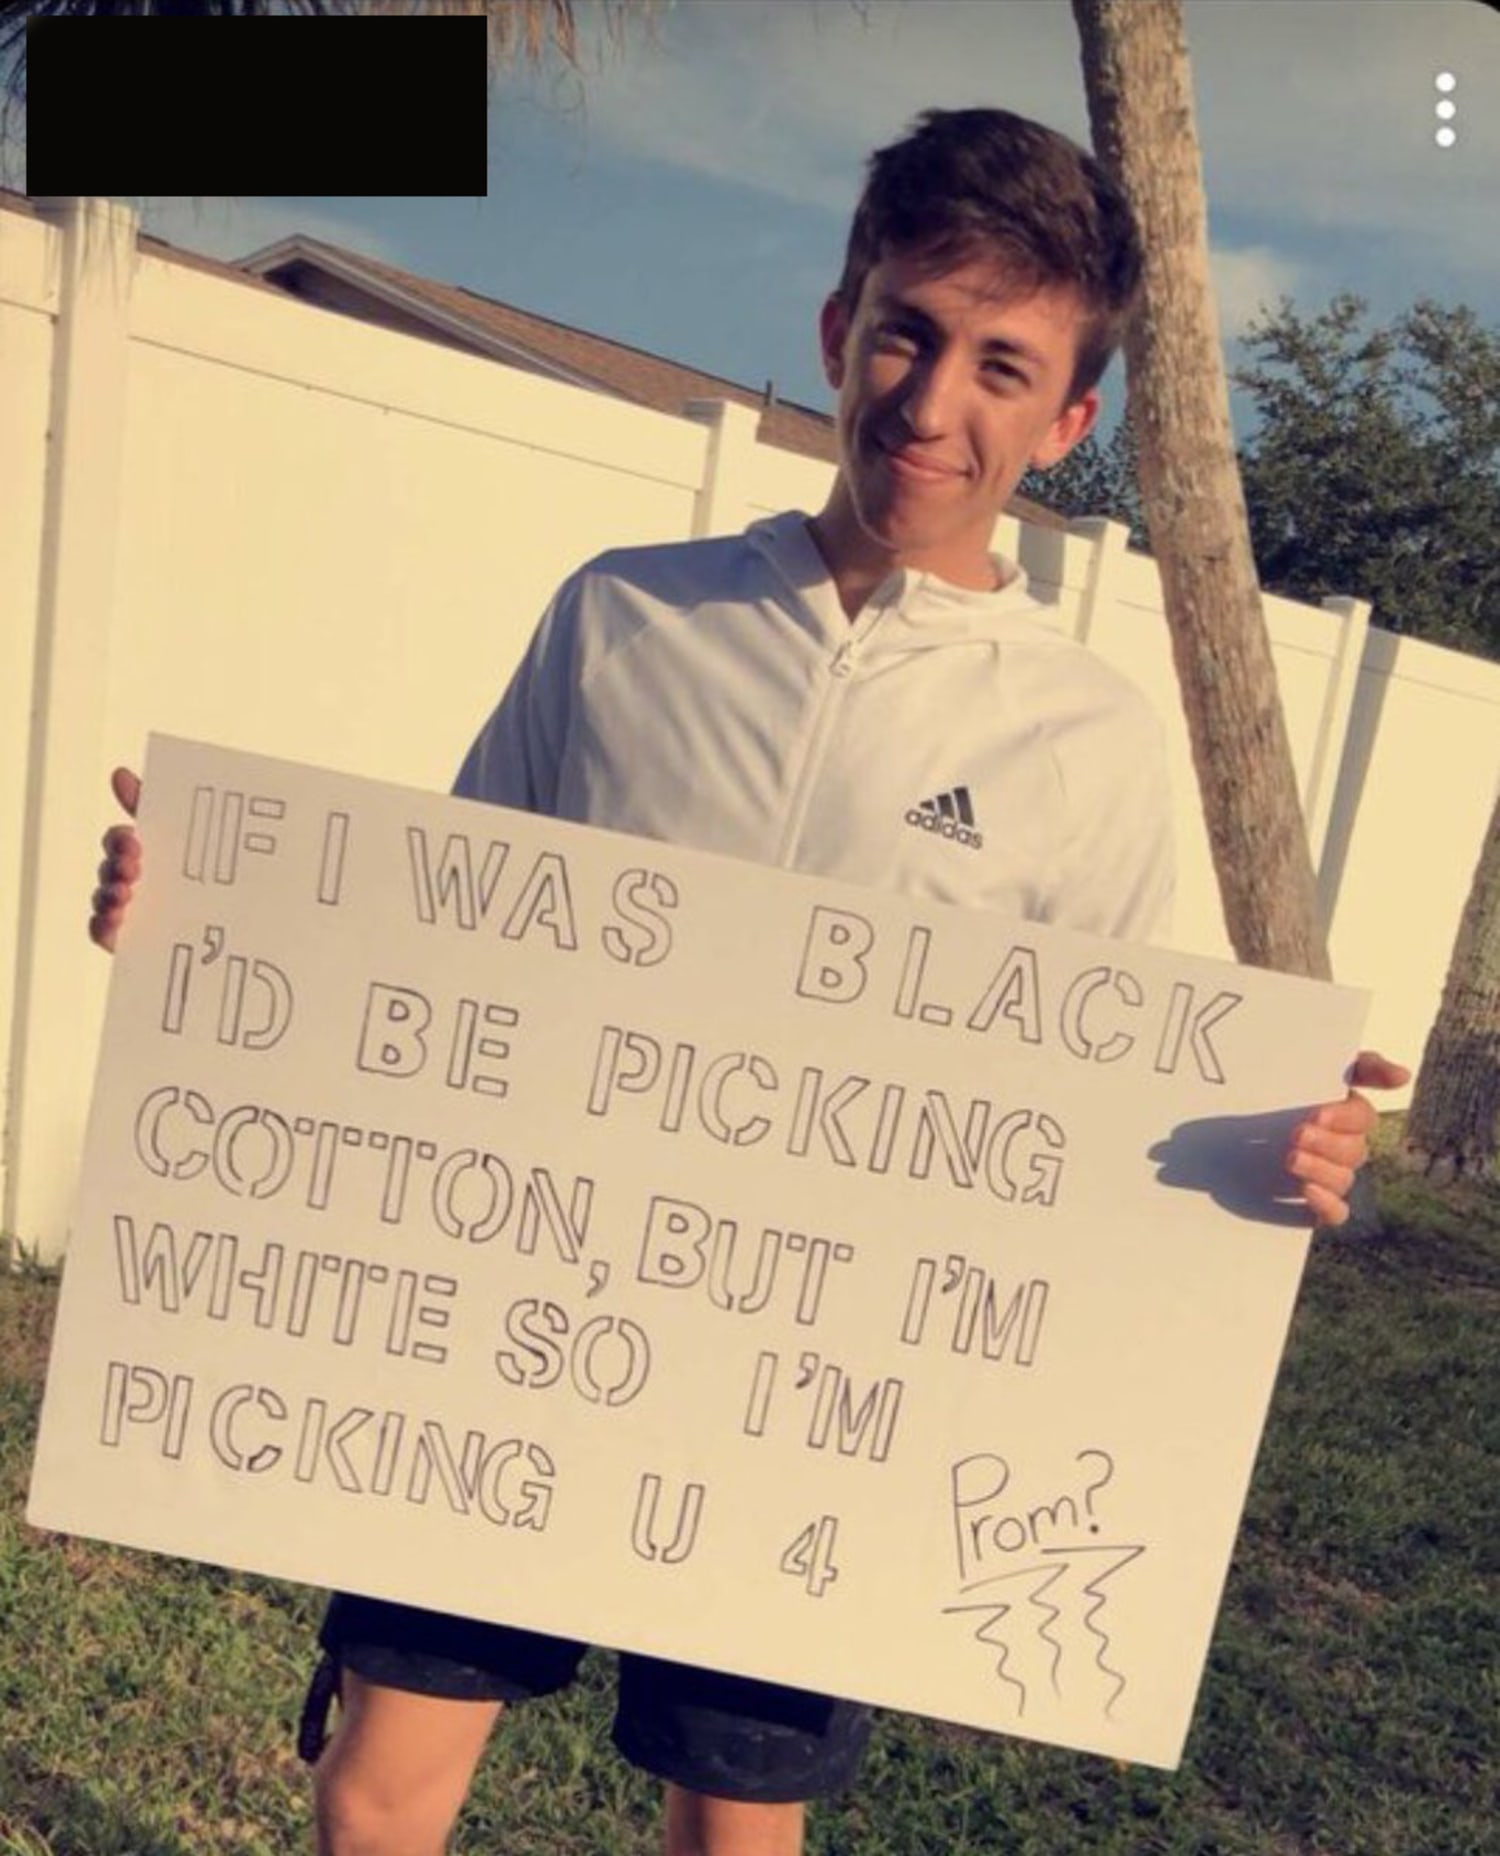 Trinity High School student's racist homecoming proposal post on